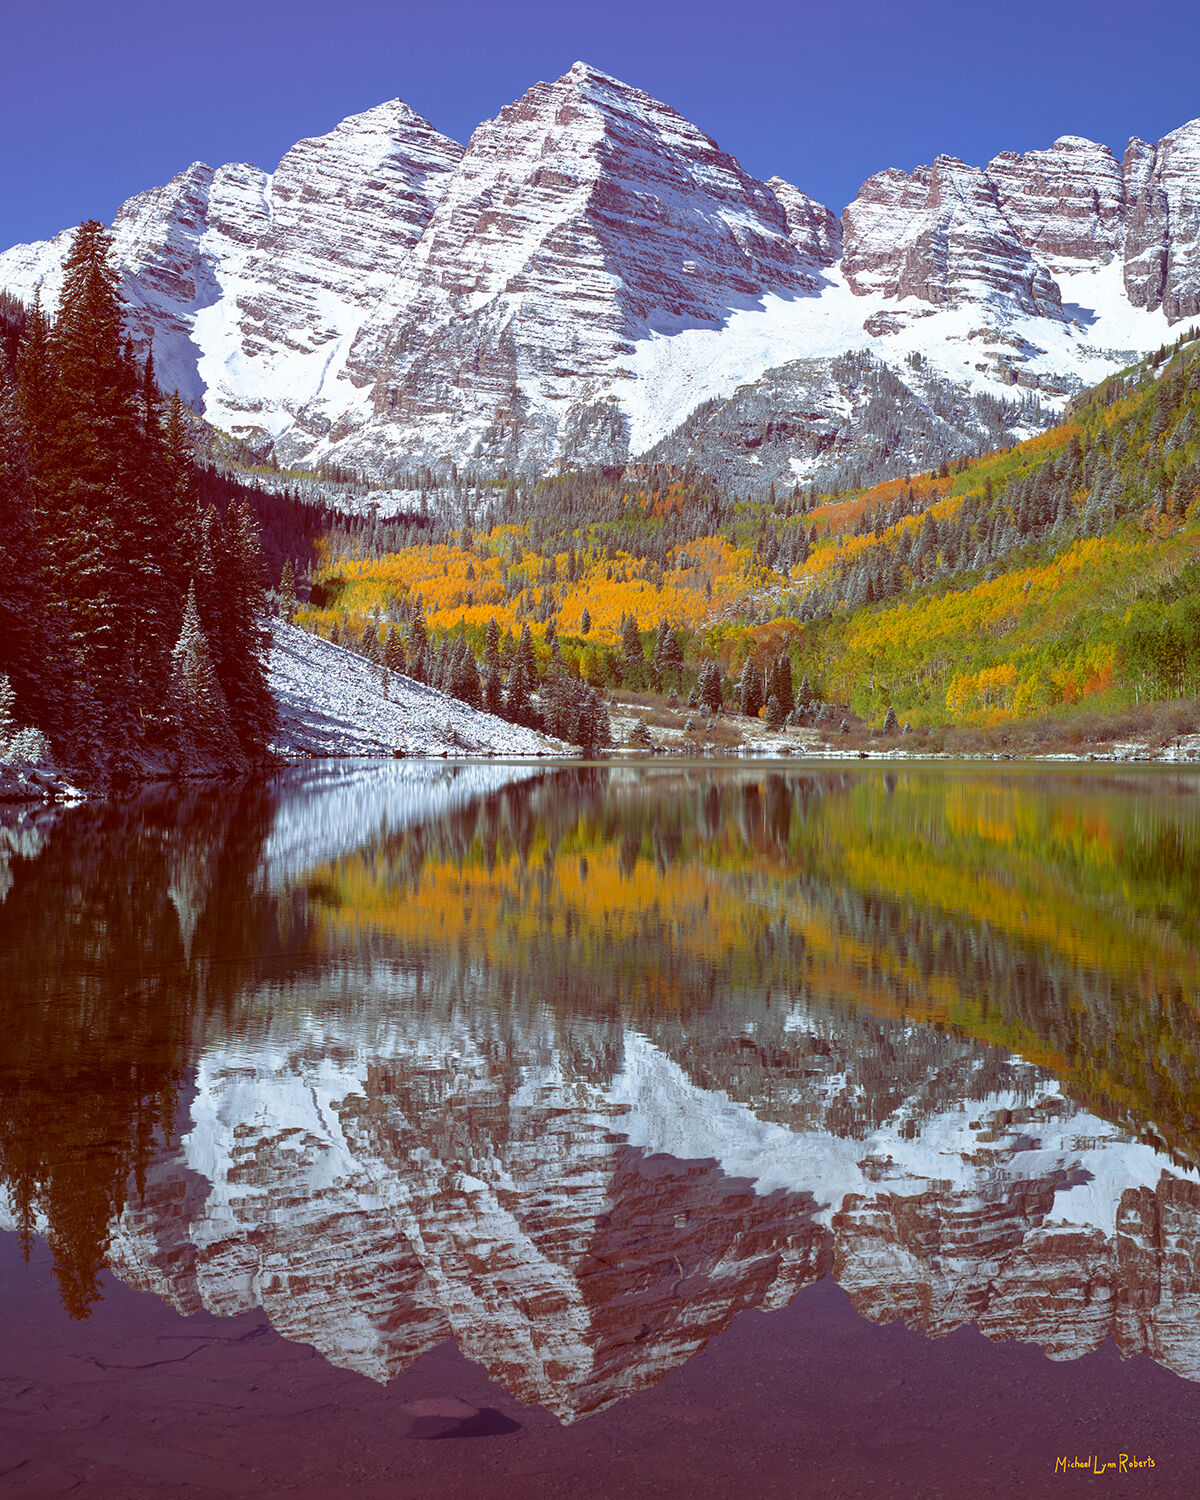 The Maroon Bells are reportedly among the most-photographed mountains in all of the United States. In the fall, when the aspens...